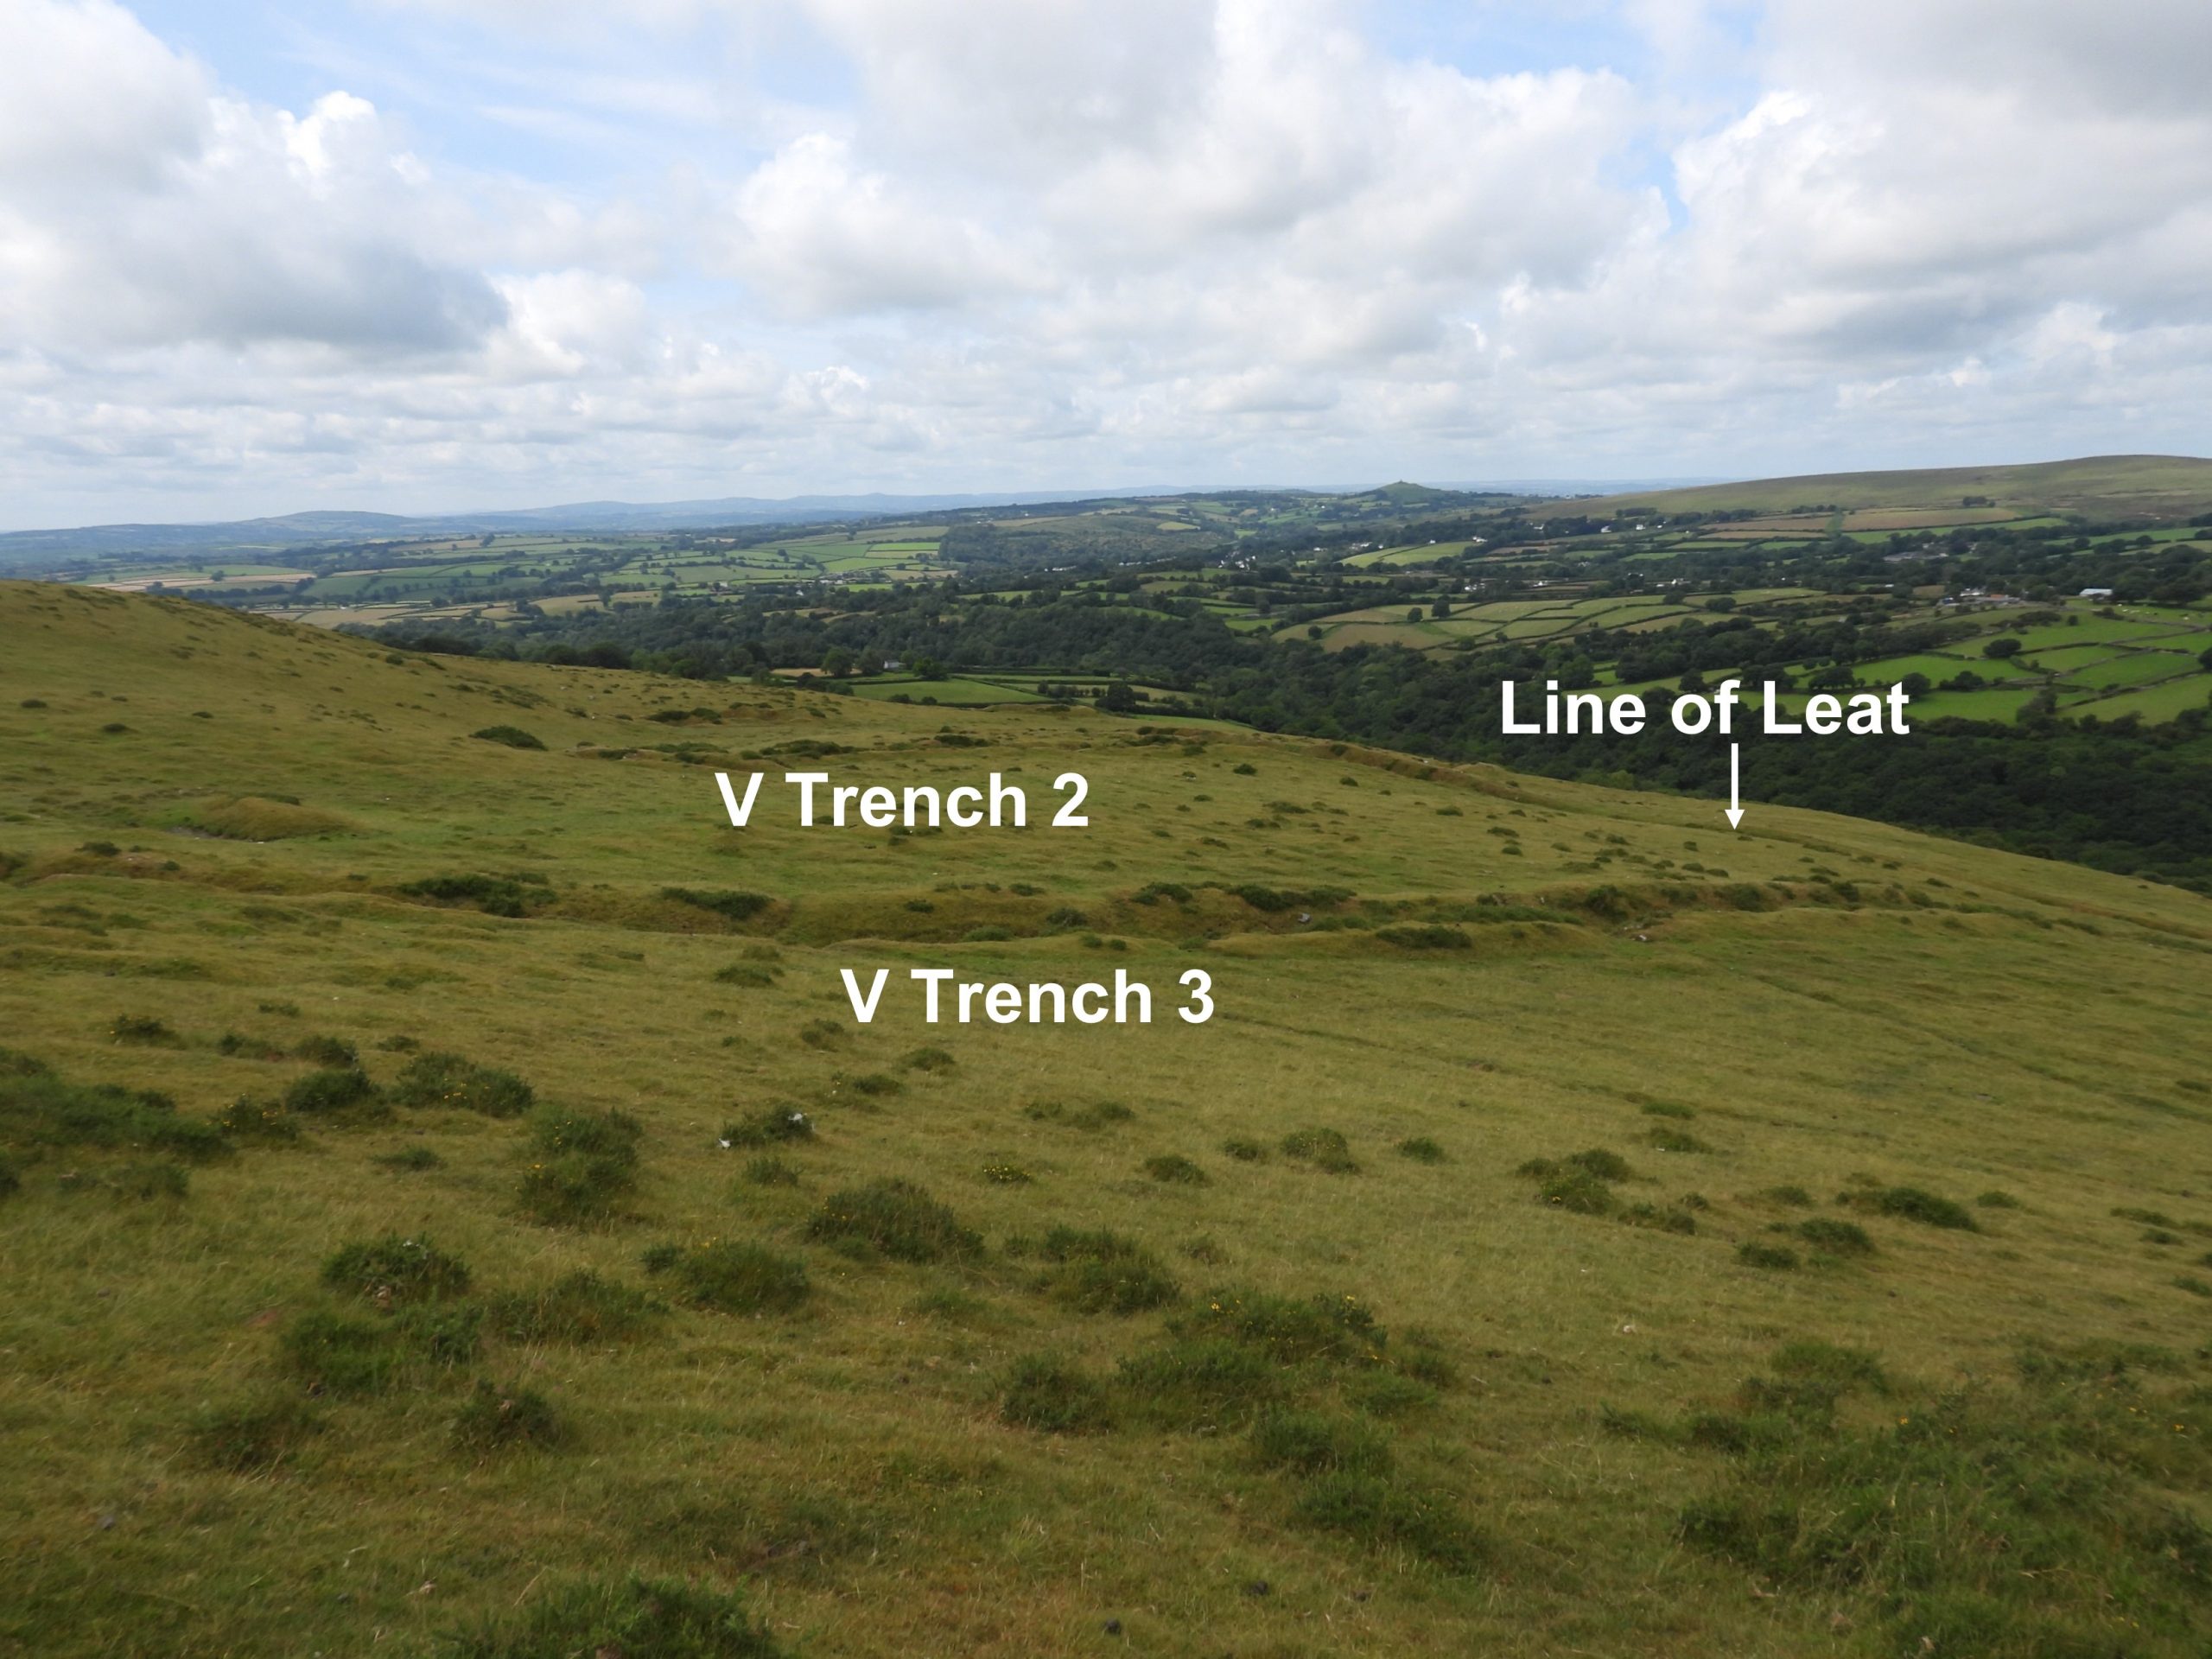 30. V Trenches 2 and 3